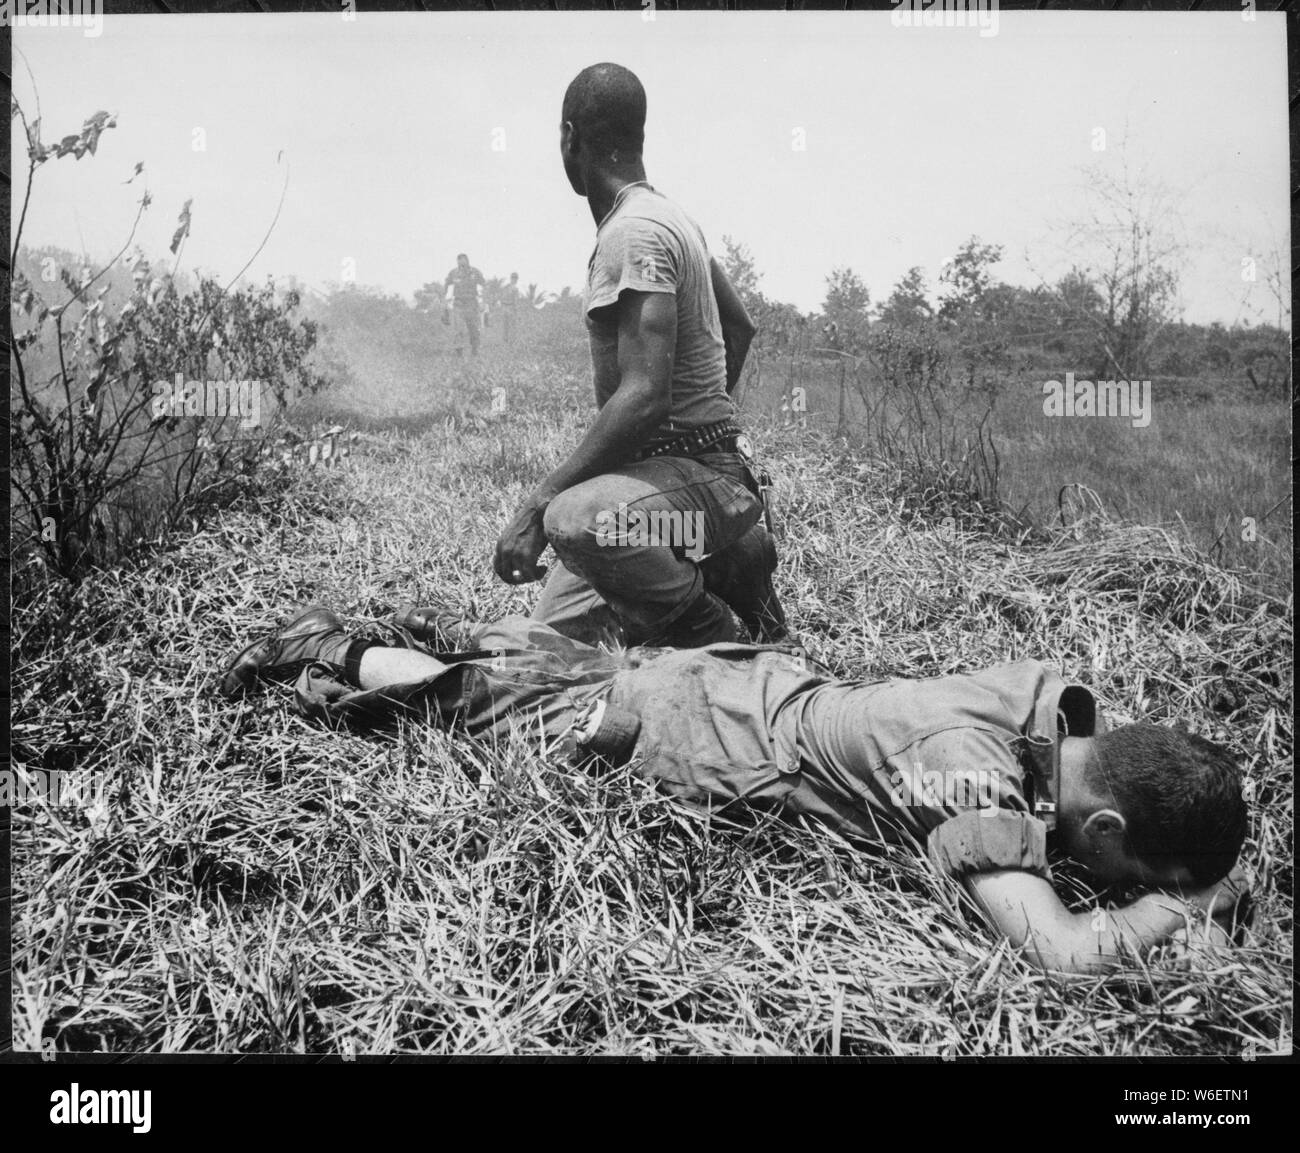 A young American lieutenant, his leg burned by an exploding Viet Cong white phosphorus booby trap, is treated by a medic., 1966; General notes:  Use War and Conflict Number 404 when ordering a reproduction or requesting information about this image. Stock Photo